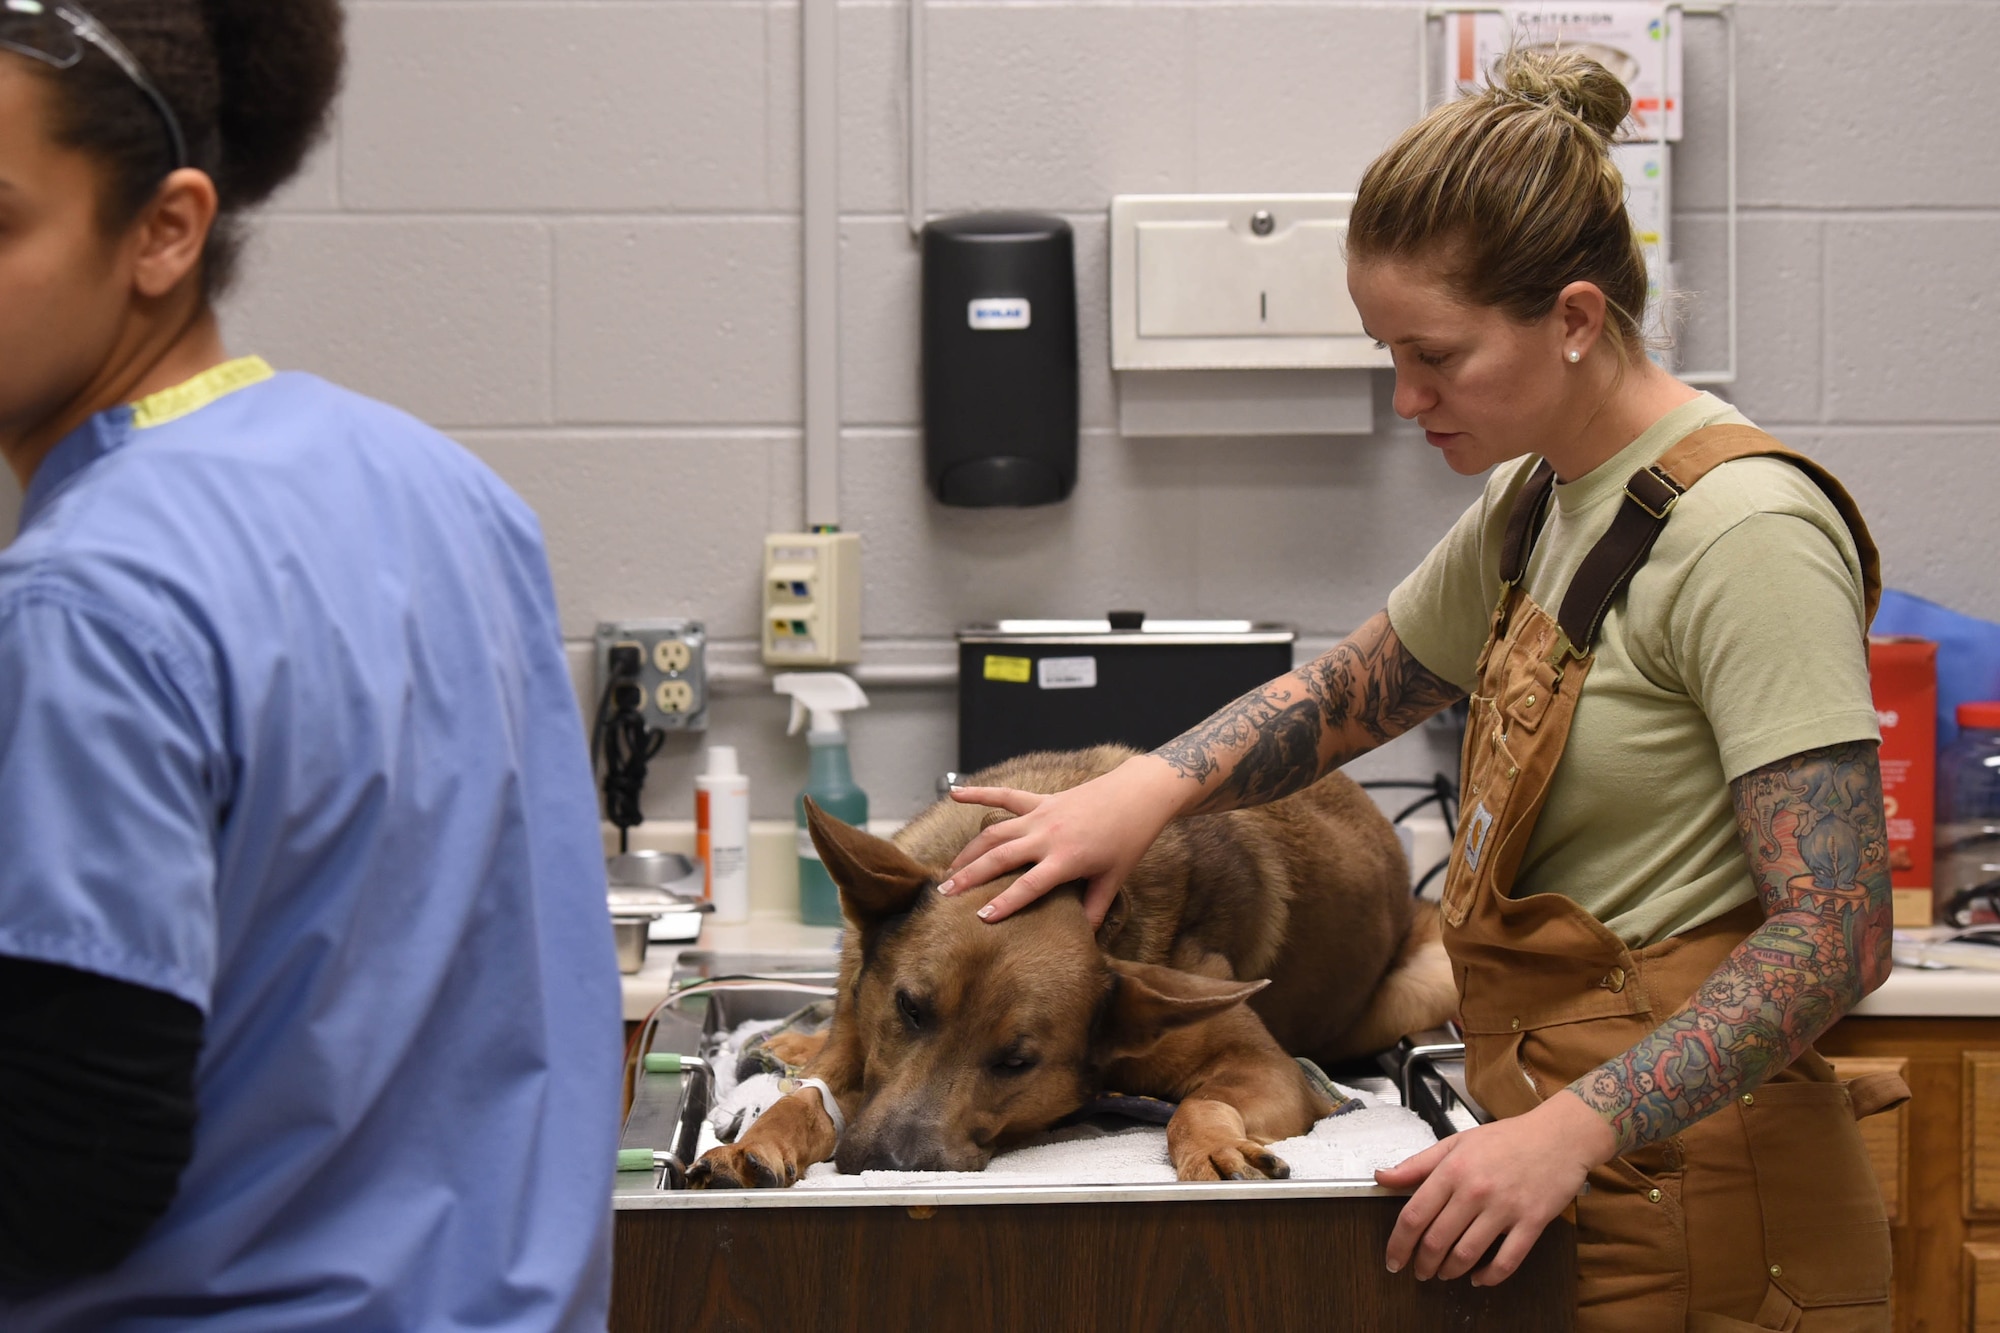 Staff Sgt. Samantha Champion, a 28th Security Forces Squadron military working dog handler, comforts MWD Lezer as his anesthetic sets in during an appointment at the veterinary clinic on Ellsworth Air Force Base, S.D., Dec. 4, 2018. Dental procedures for military working dogs require the dogs to be put under for the safety of the veterinarians and to lower the stress for the animals. (U.S. Air Force photo by Airman John Ennis)